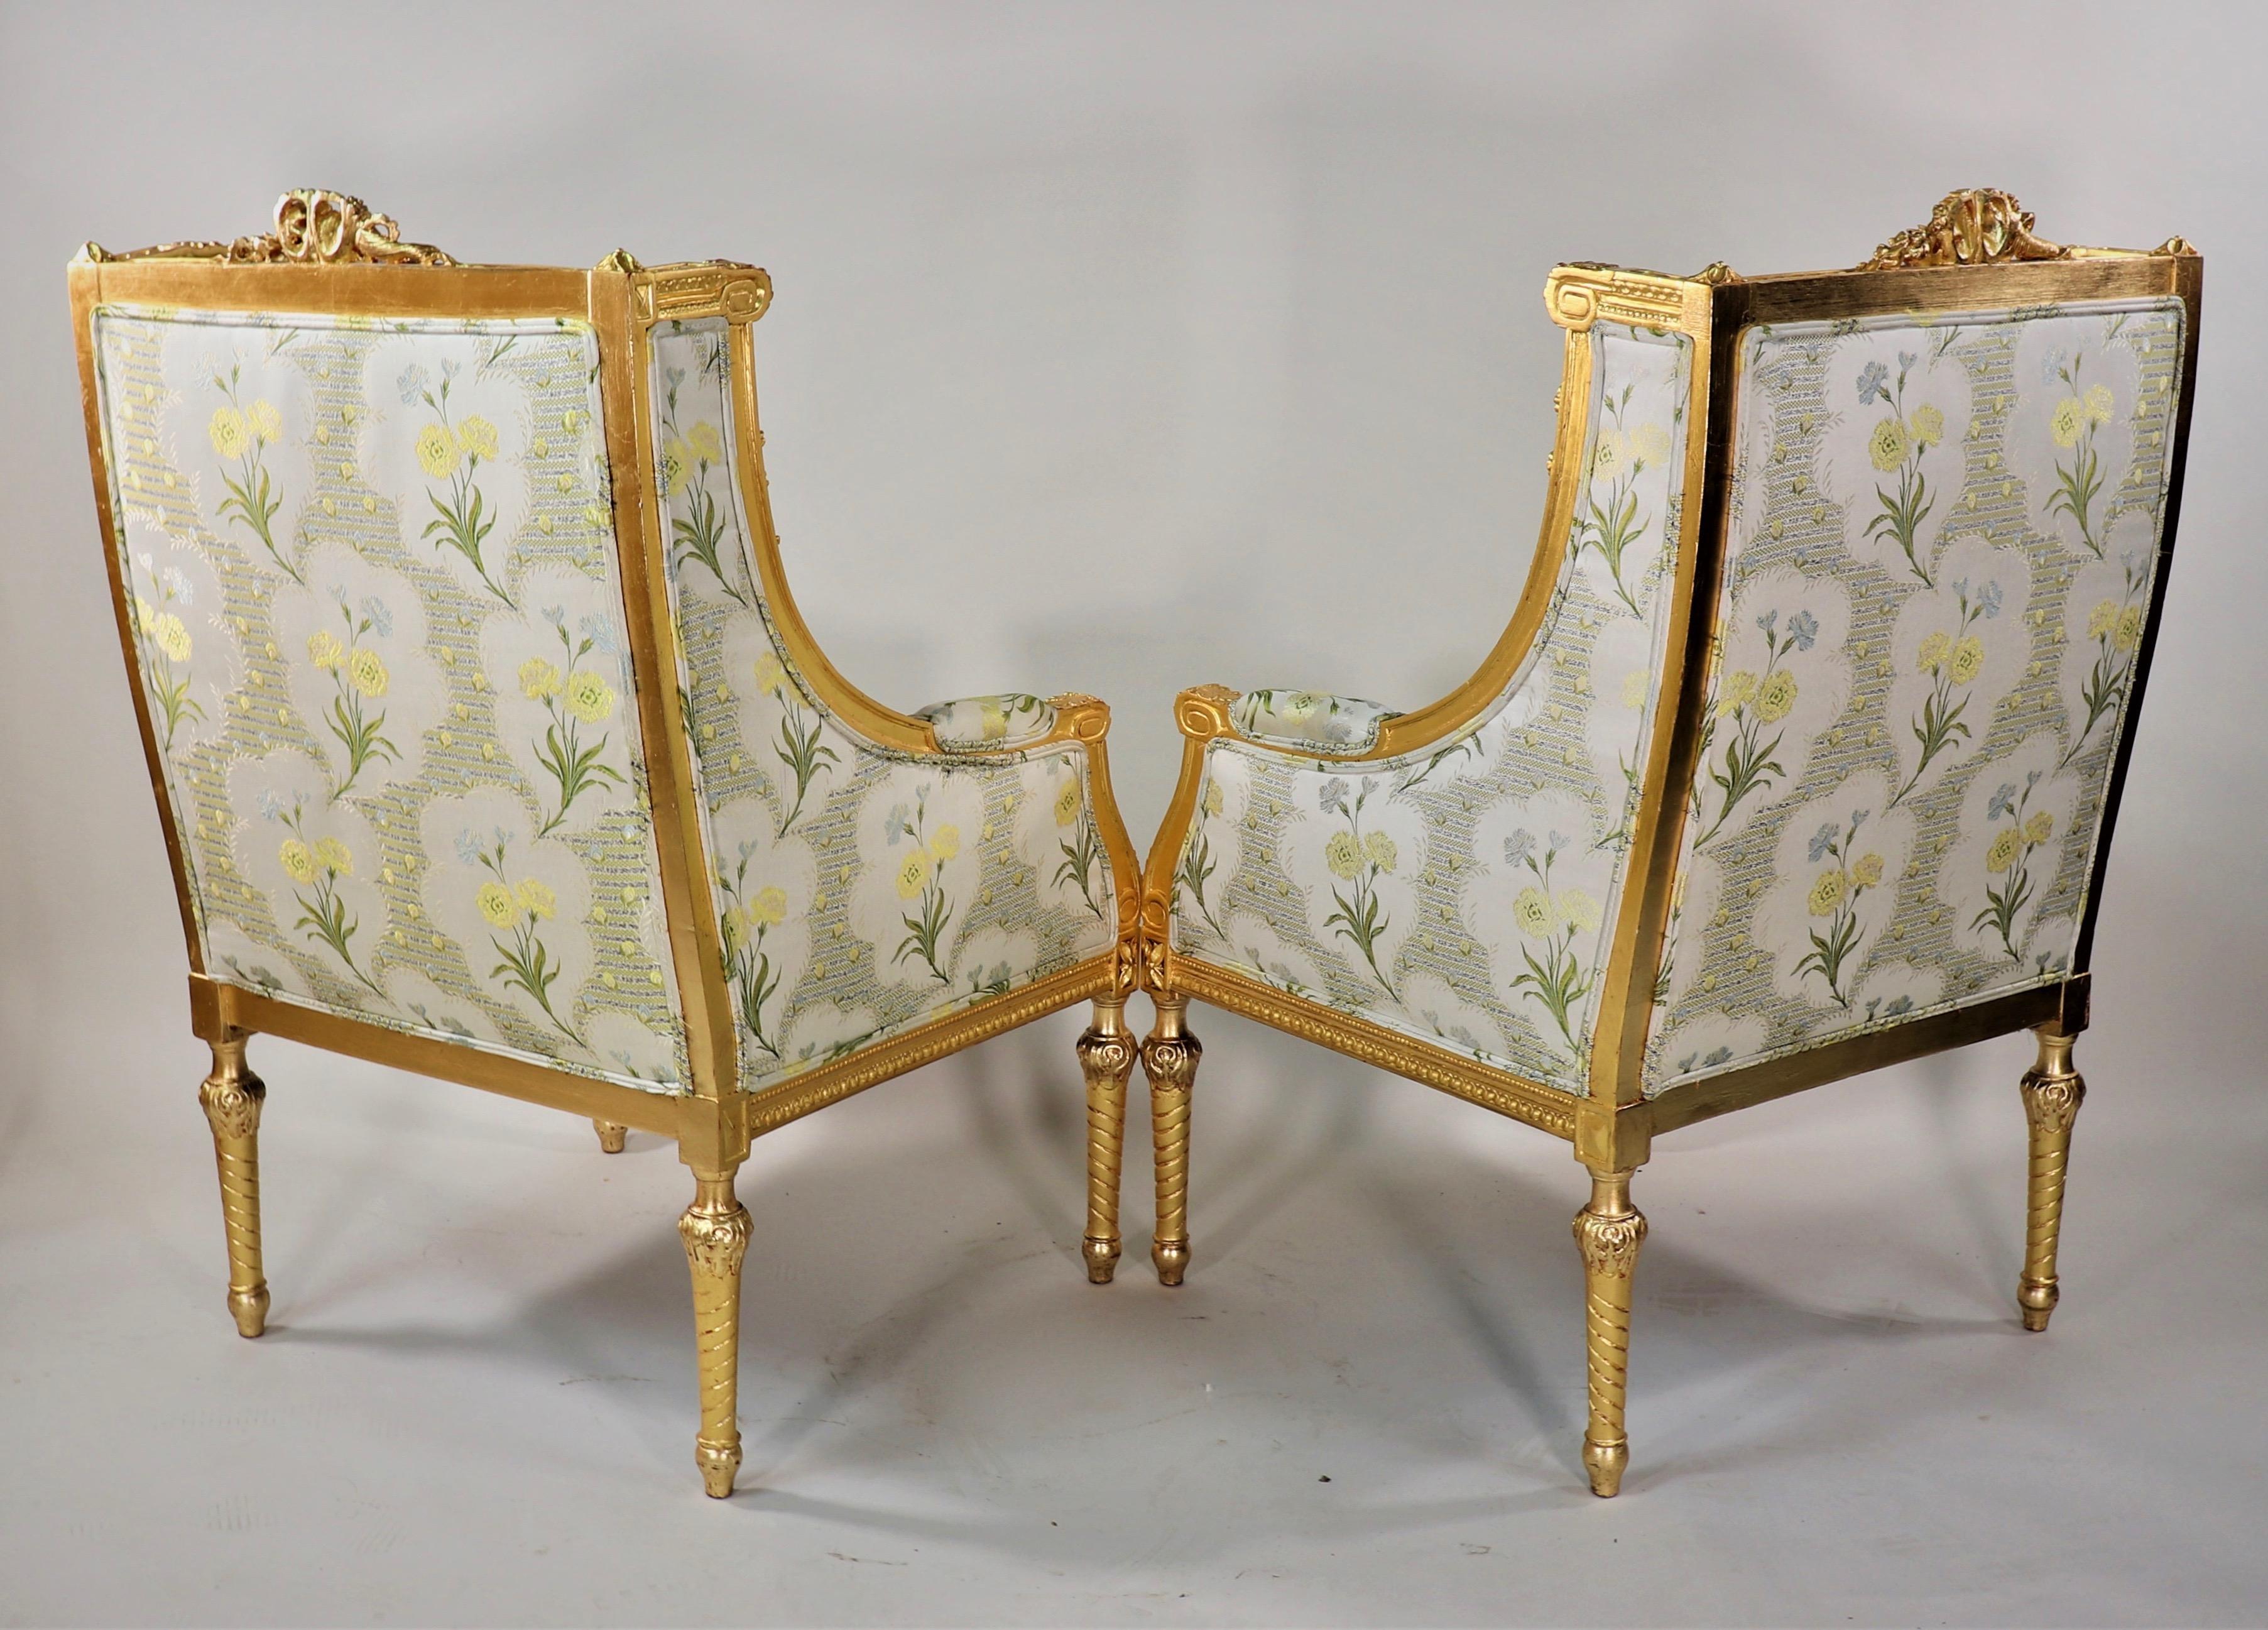 Hand-Carved Pair of Circa 1900 French Louis XVI Style Gilt Armchairs